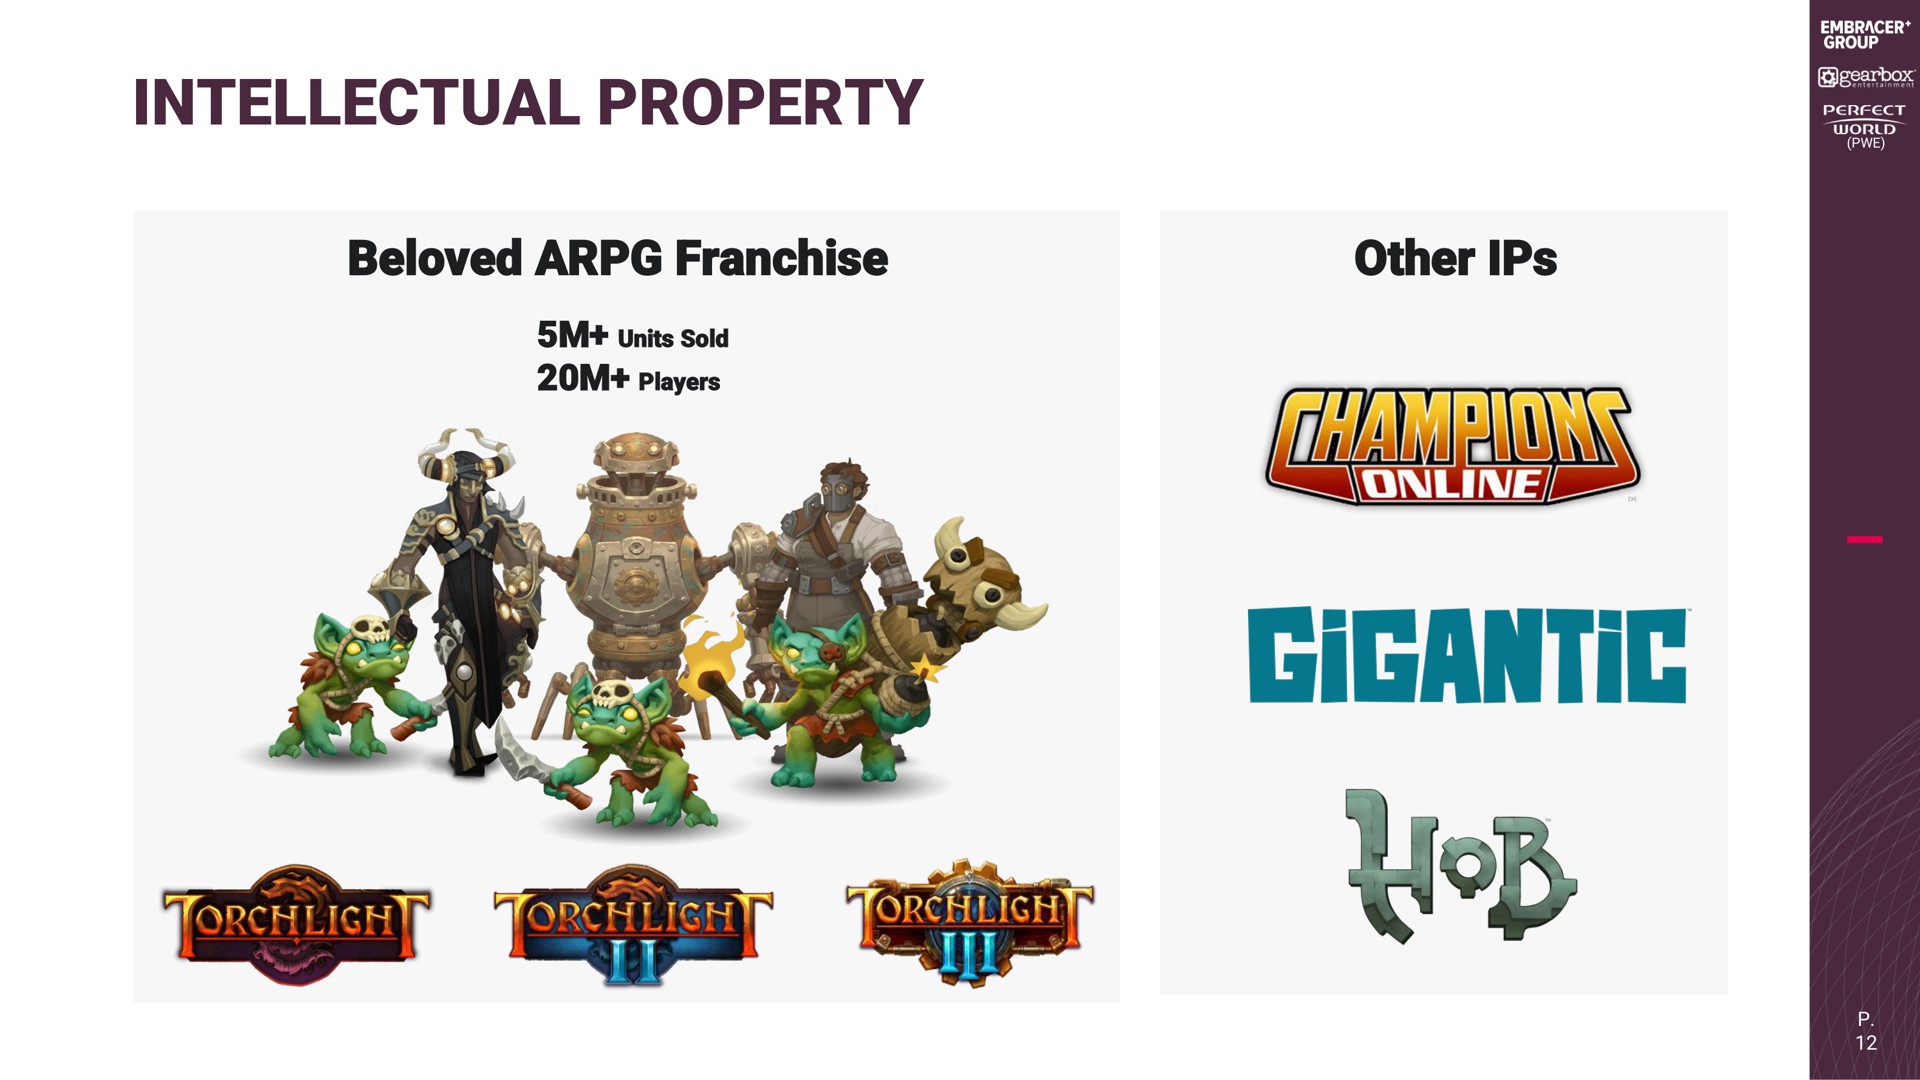 intellectual property units sold beloved franchise other gigantic | Embracer Group